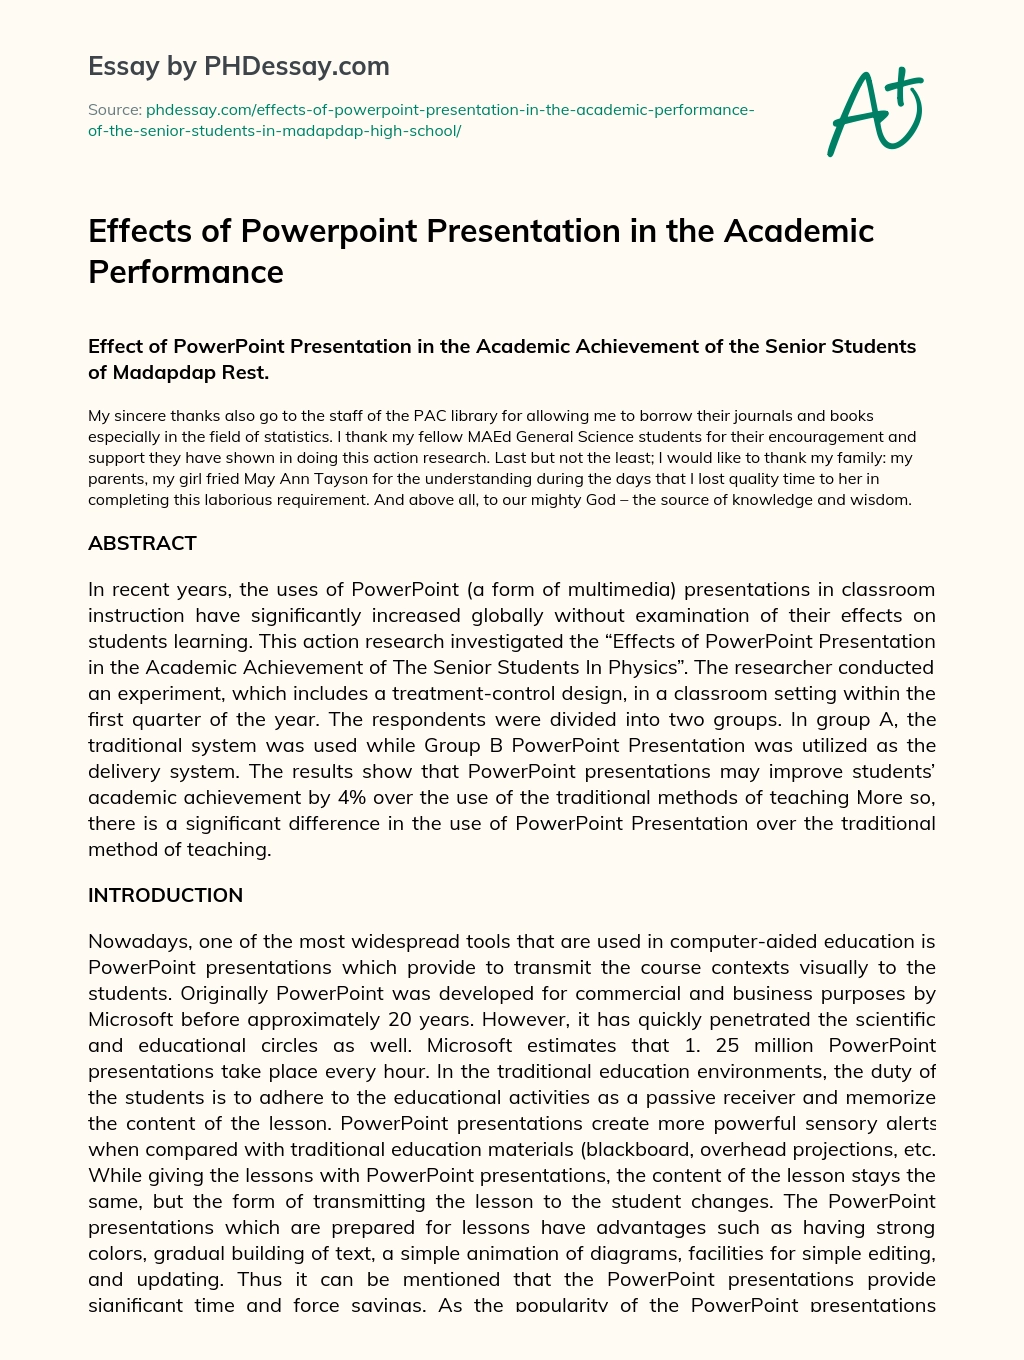 Effects of Powerpoint Presentation in the Academic Performance essay